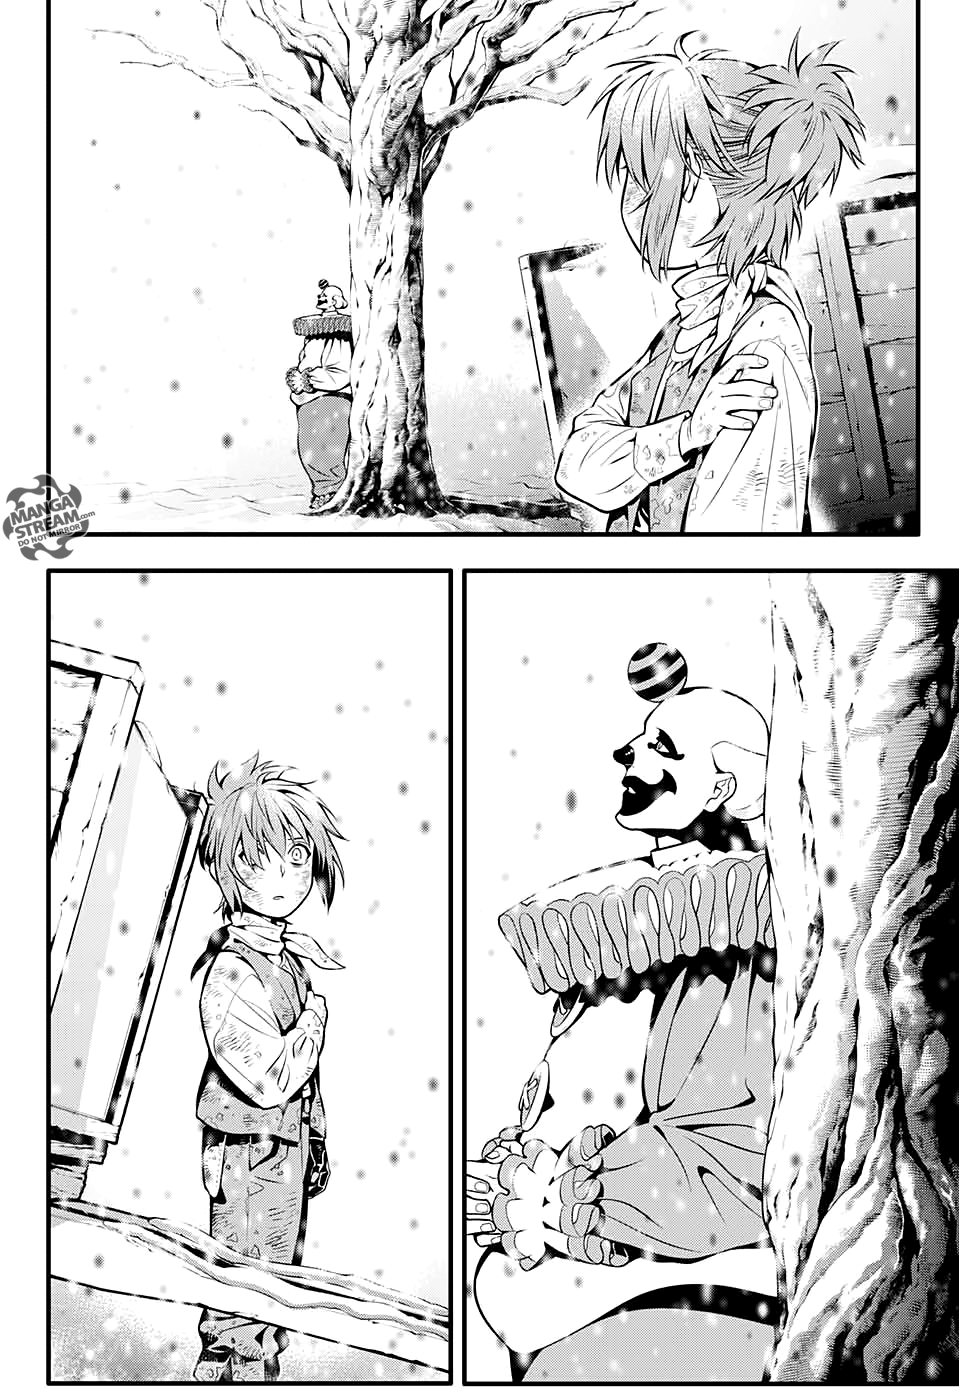 D.Gray-man chapter 232 page 28